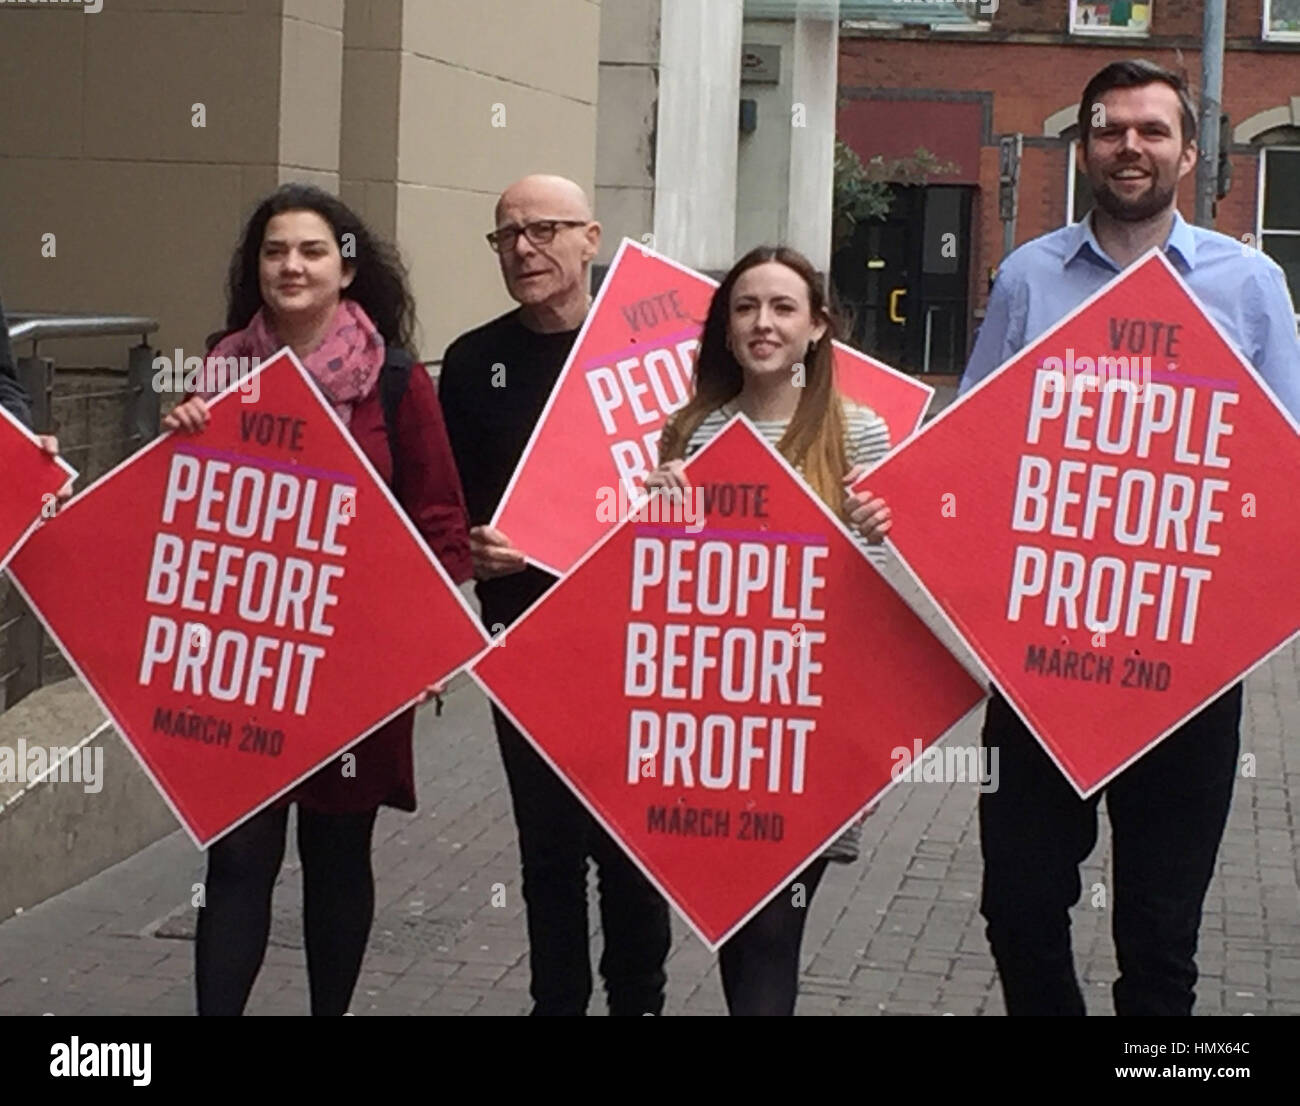 BEST QUALITY AVAILABLE People Before Profit (PBP) candidates (left to right) Ivanka Antova, Eamonn McCann, Fiona Ferguson and Gerry Carroll attend a photo call in Belfast to launch the party's campaign for the Northern Ireland Assembly election. Stock Photo